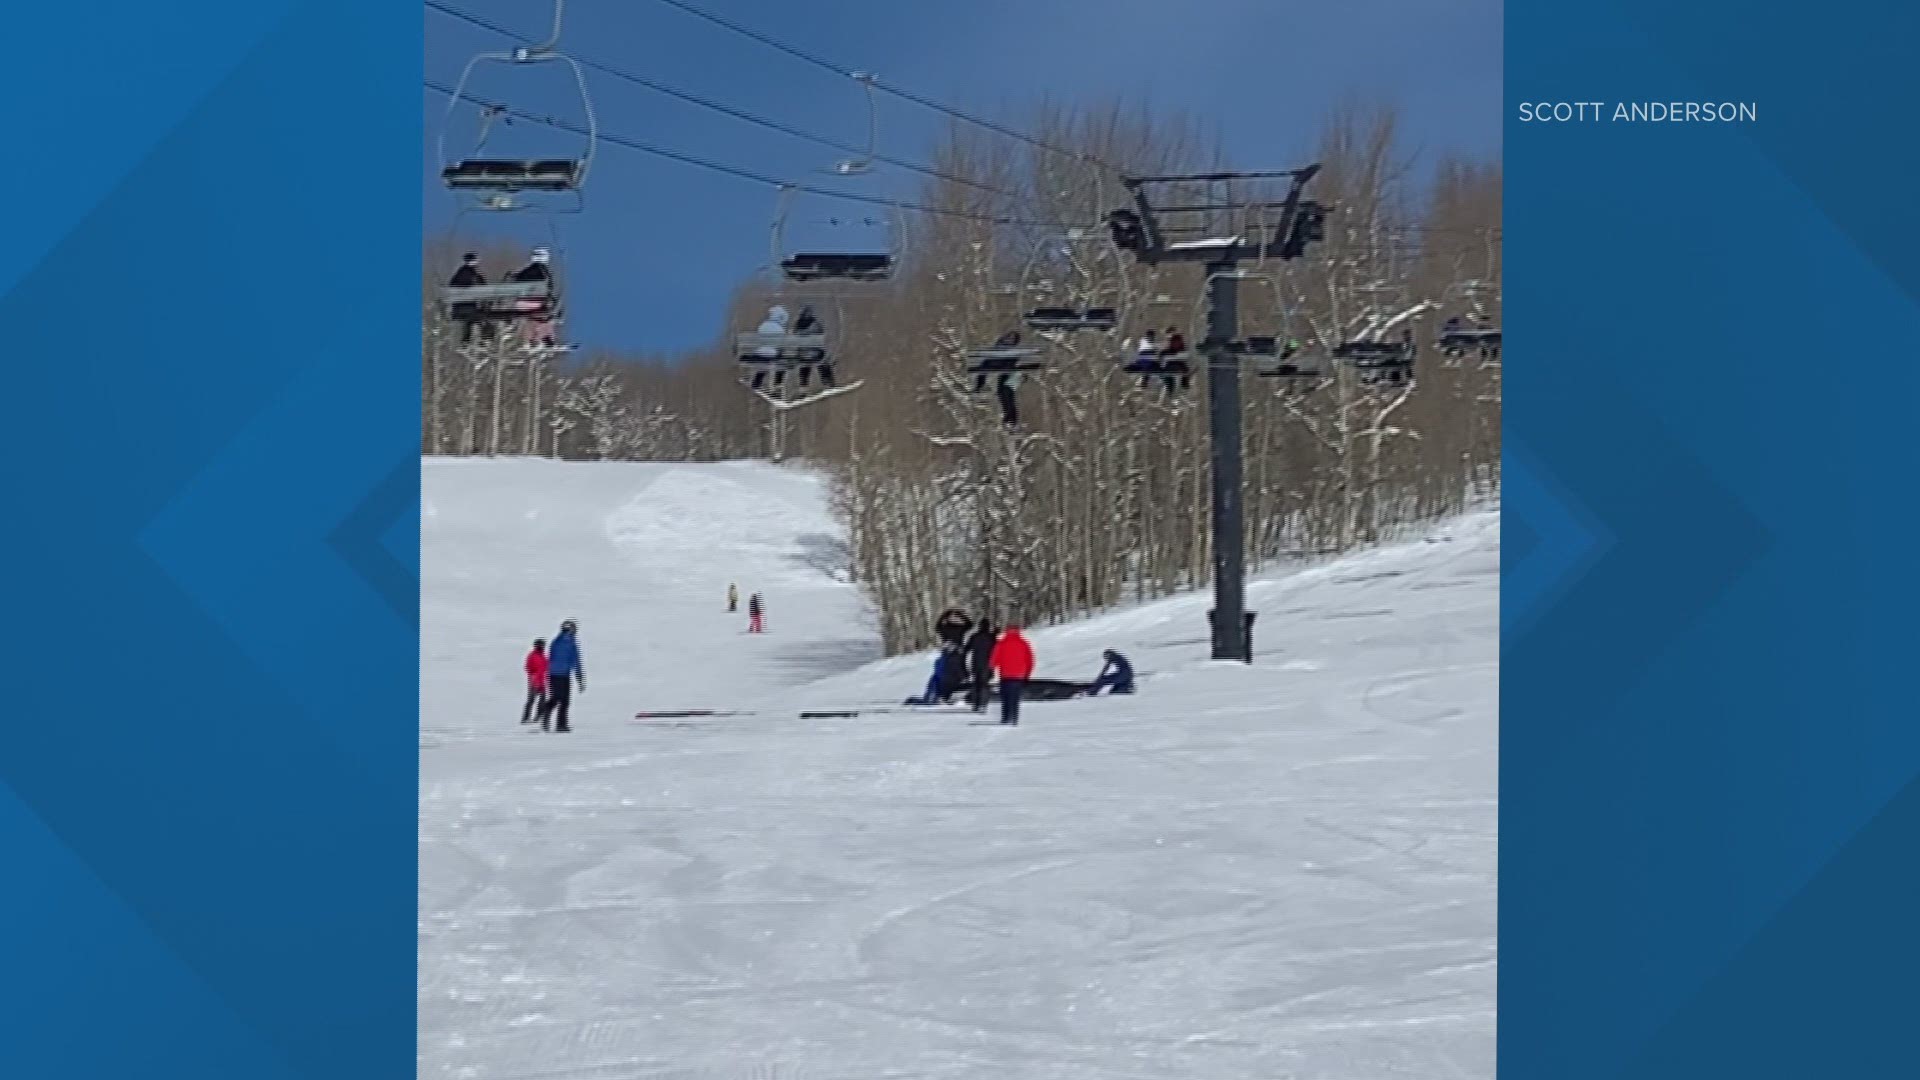 A scary moment turned celebratory when a six-year-old girl who fell from a chairlift at a Colorado ski resort was safely caught by a group of people below.